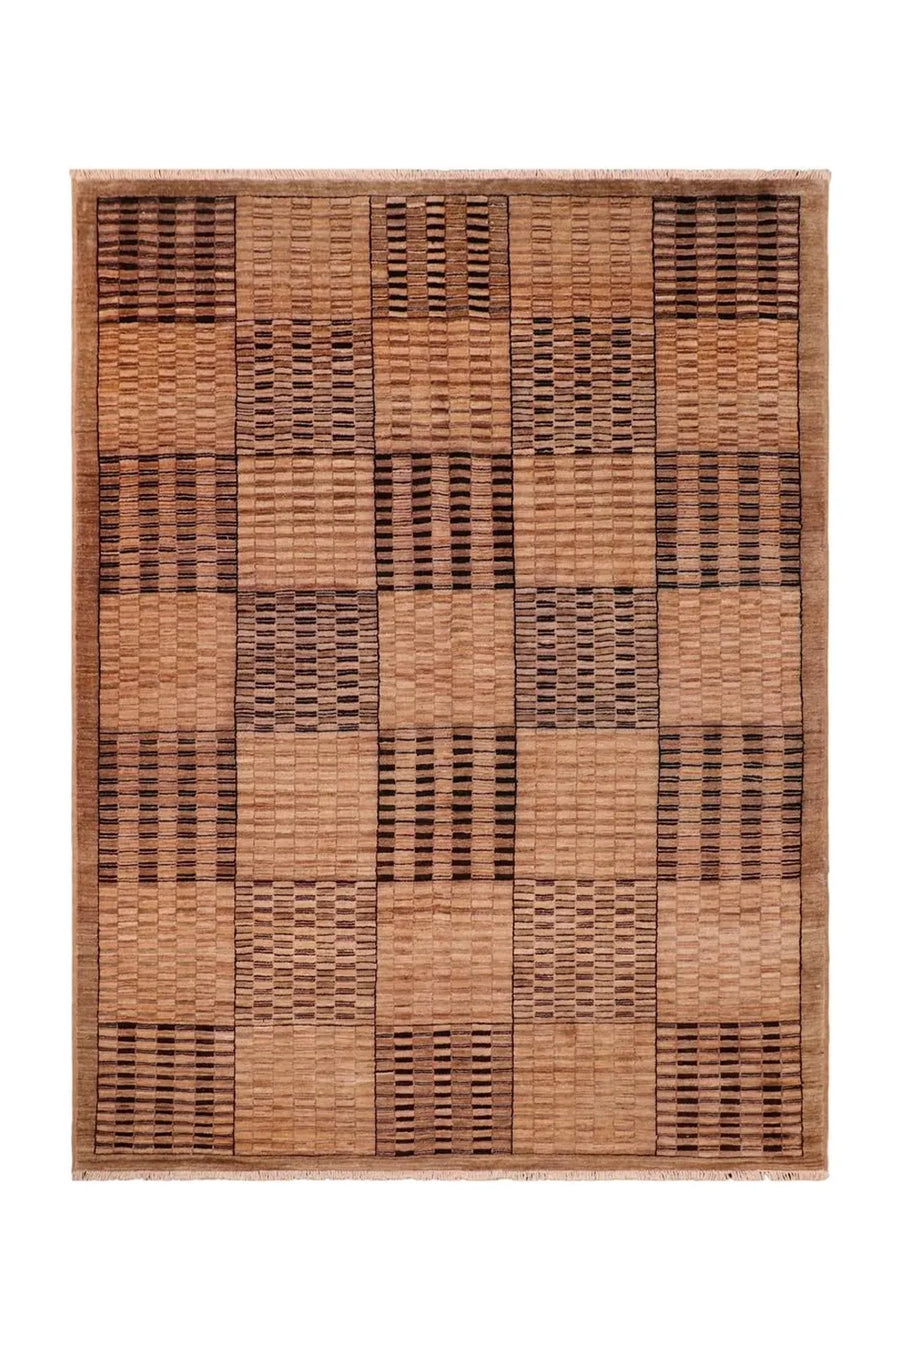 Hand-knotted brown checkered rug with a unique Gabbeh wool design.